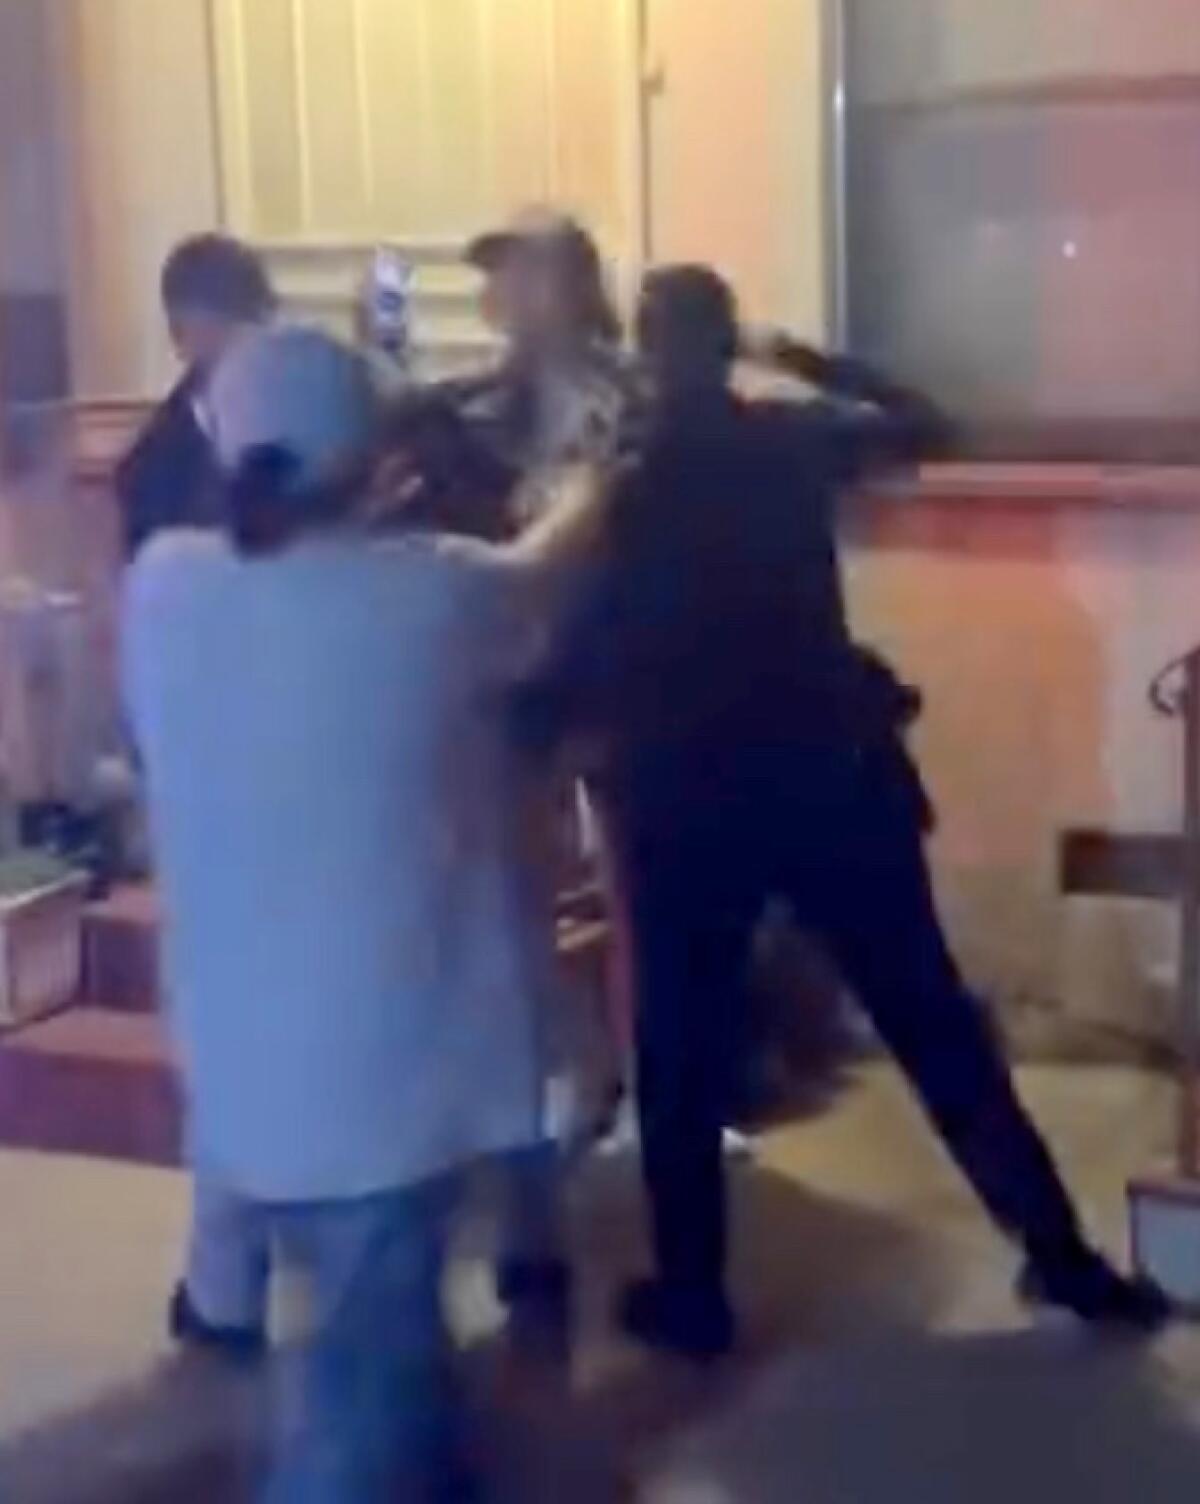 An image from video shows a police officer with a fist raised toward a person's face.